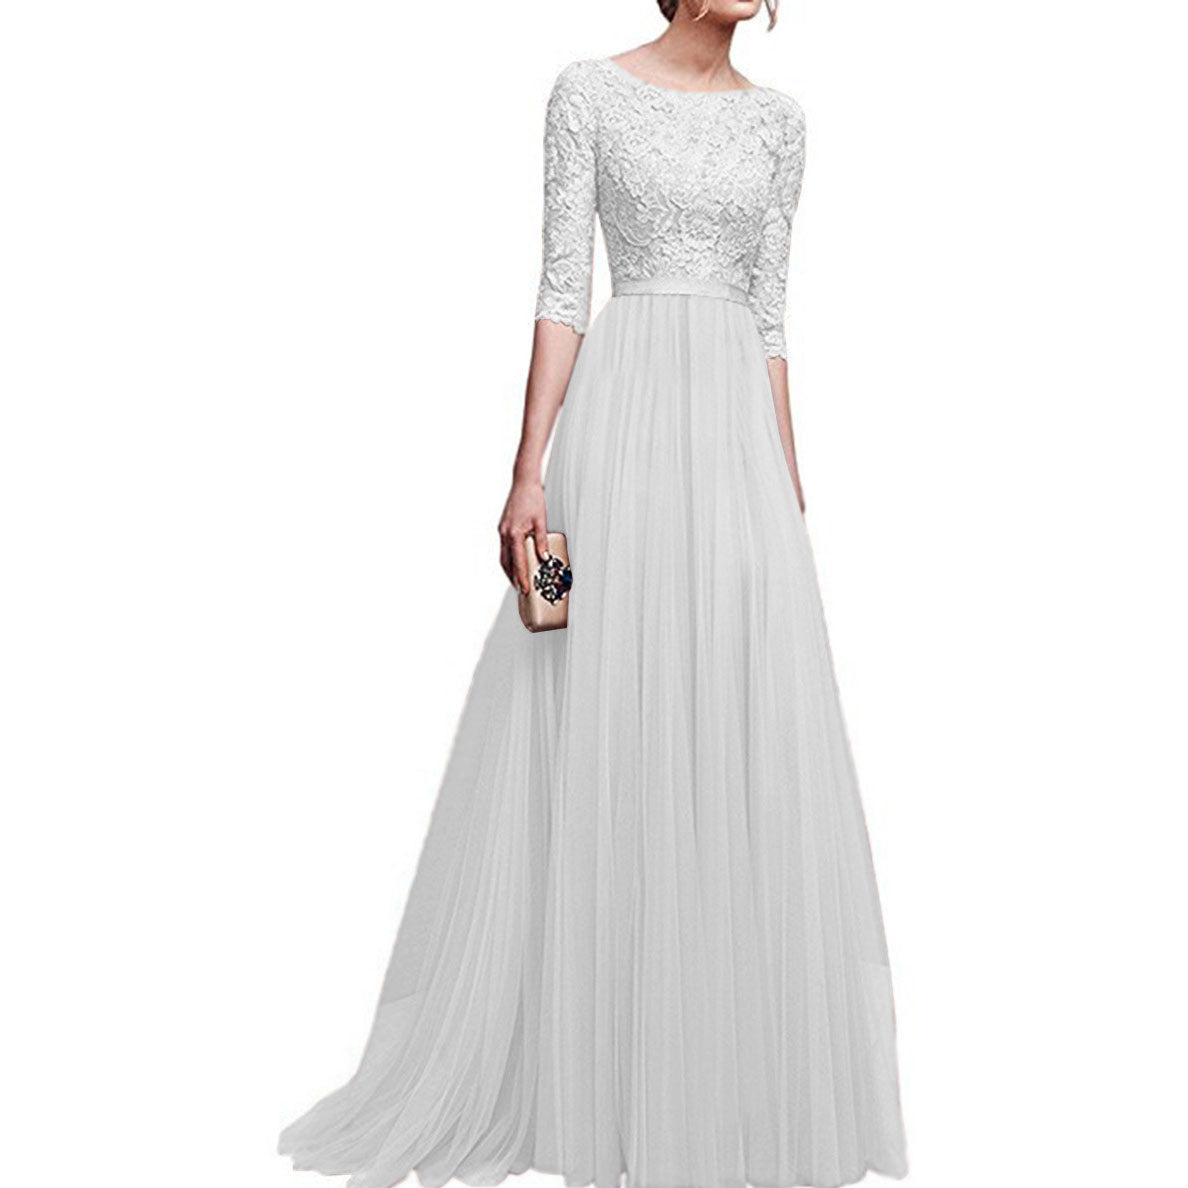 Lace Patchwork Half Sleeves Long Party Dress